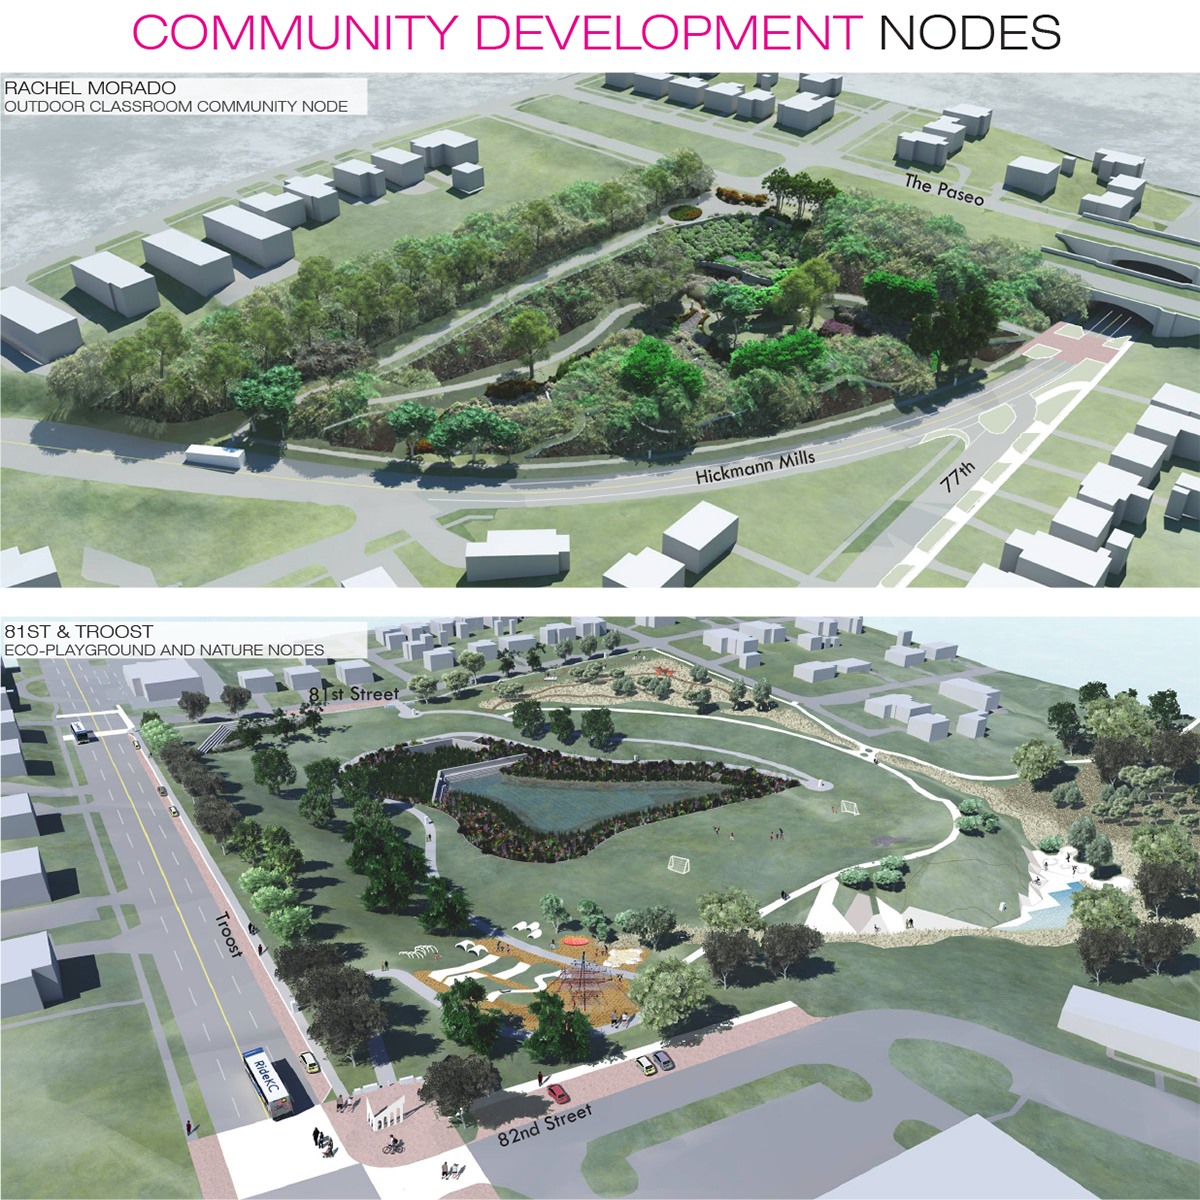 A rendering of Rachel Morado outdoor classroom and an ecoplayground at 81st and Troost.